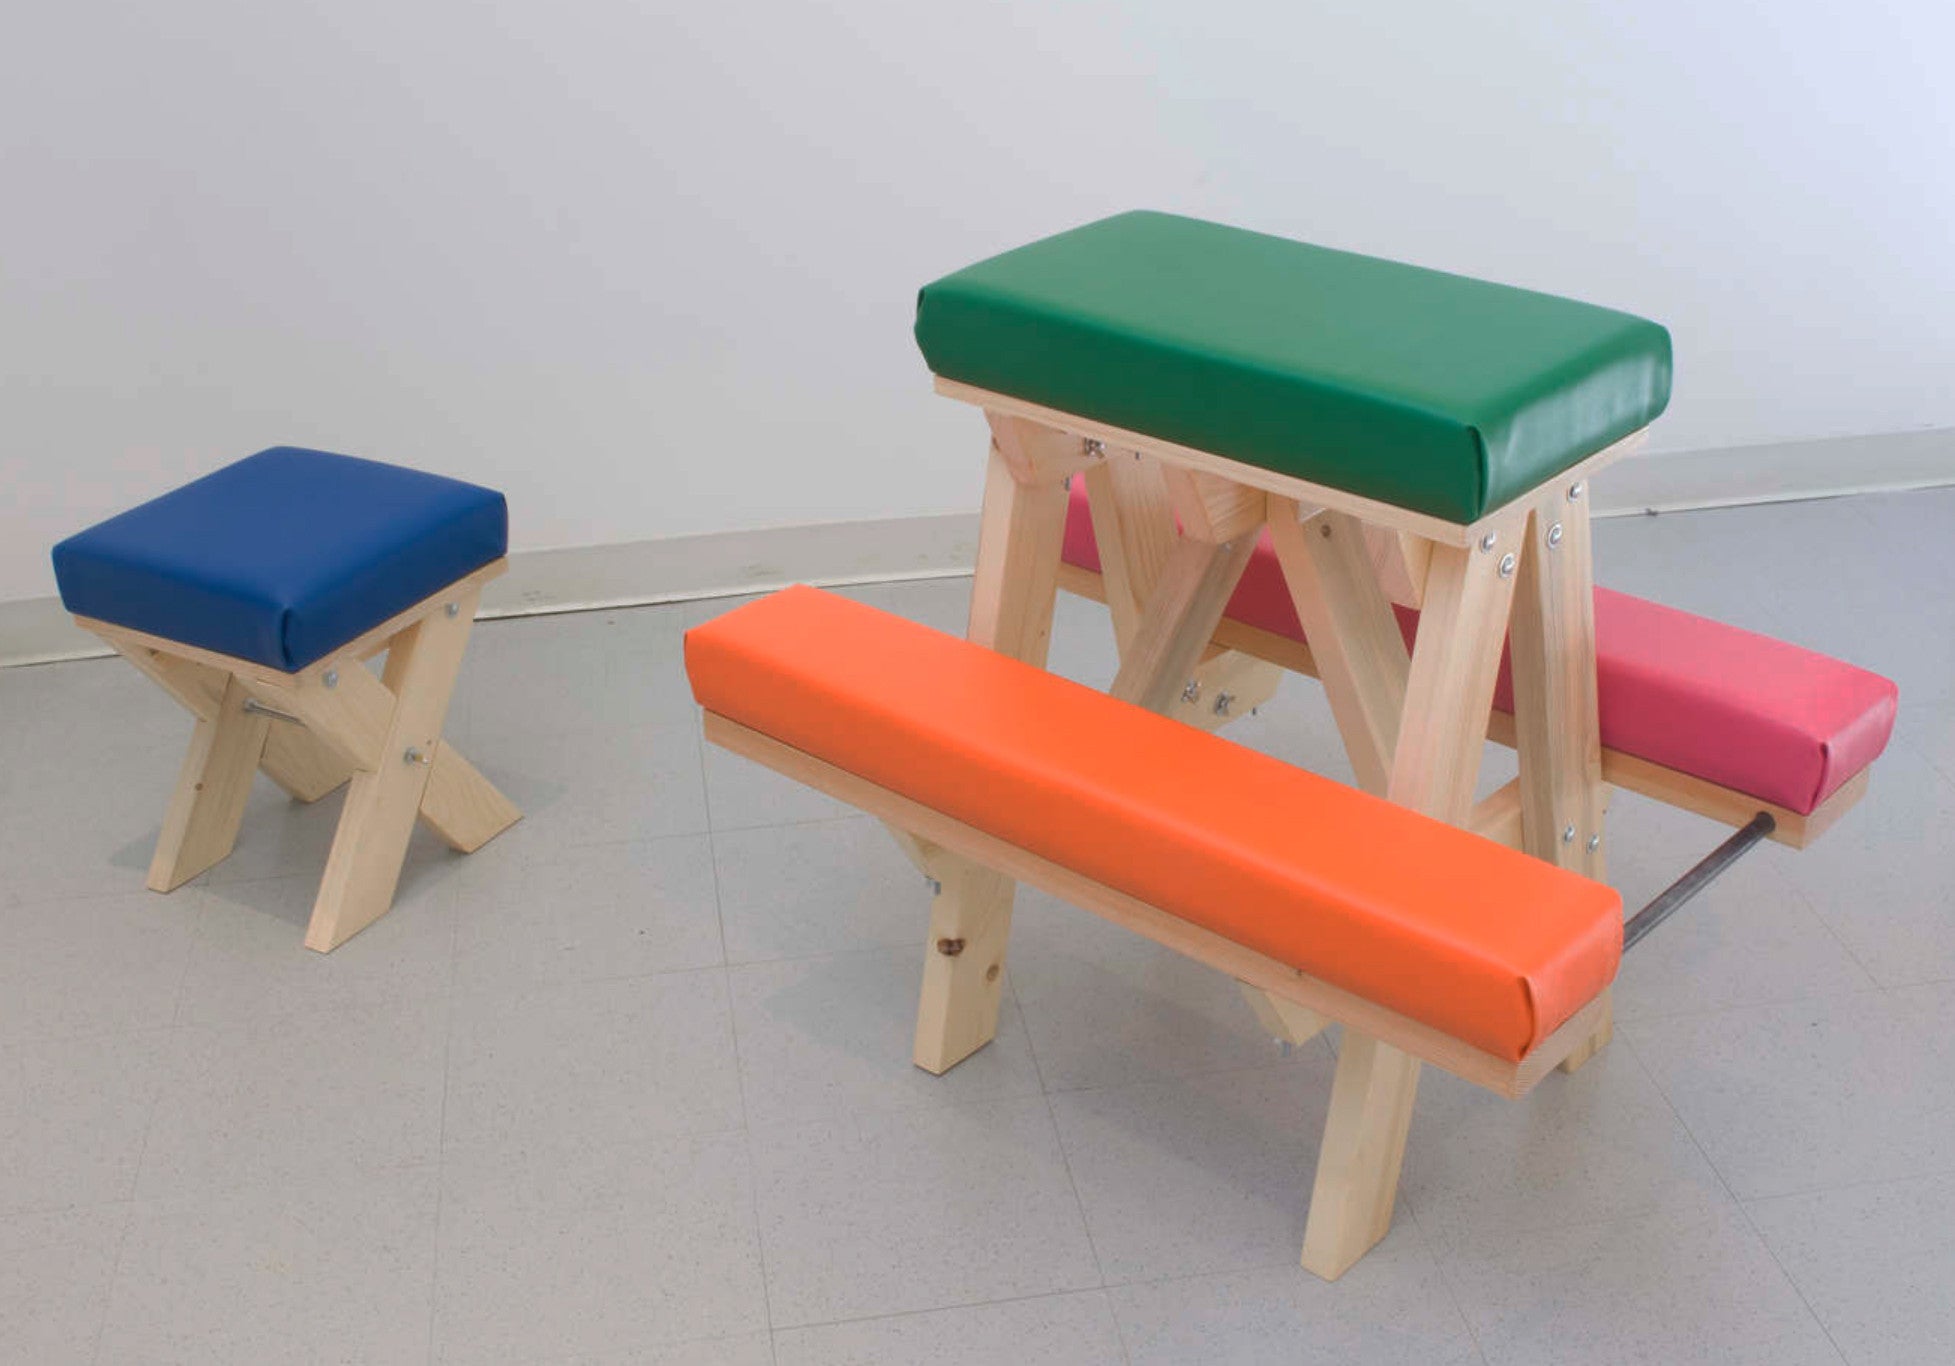 Anthony Viti, "Work Out Bench"